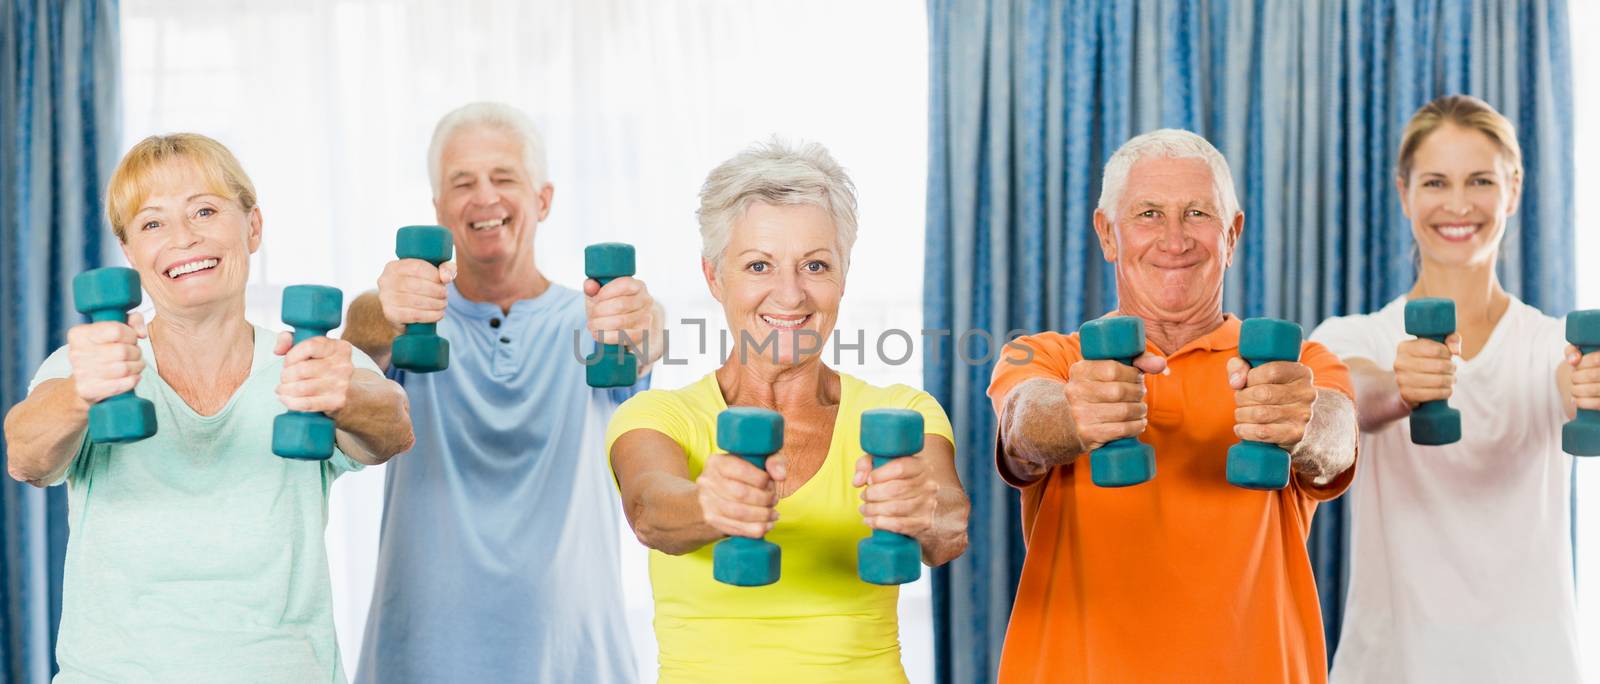 Seniors exercising with weights during sports class